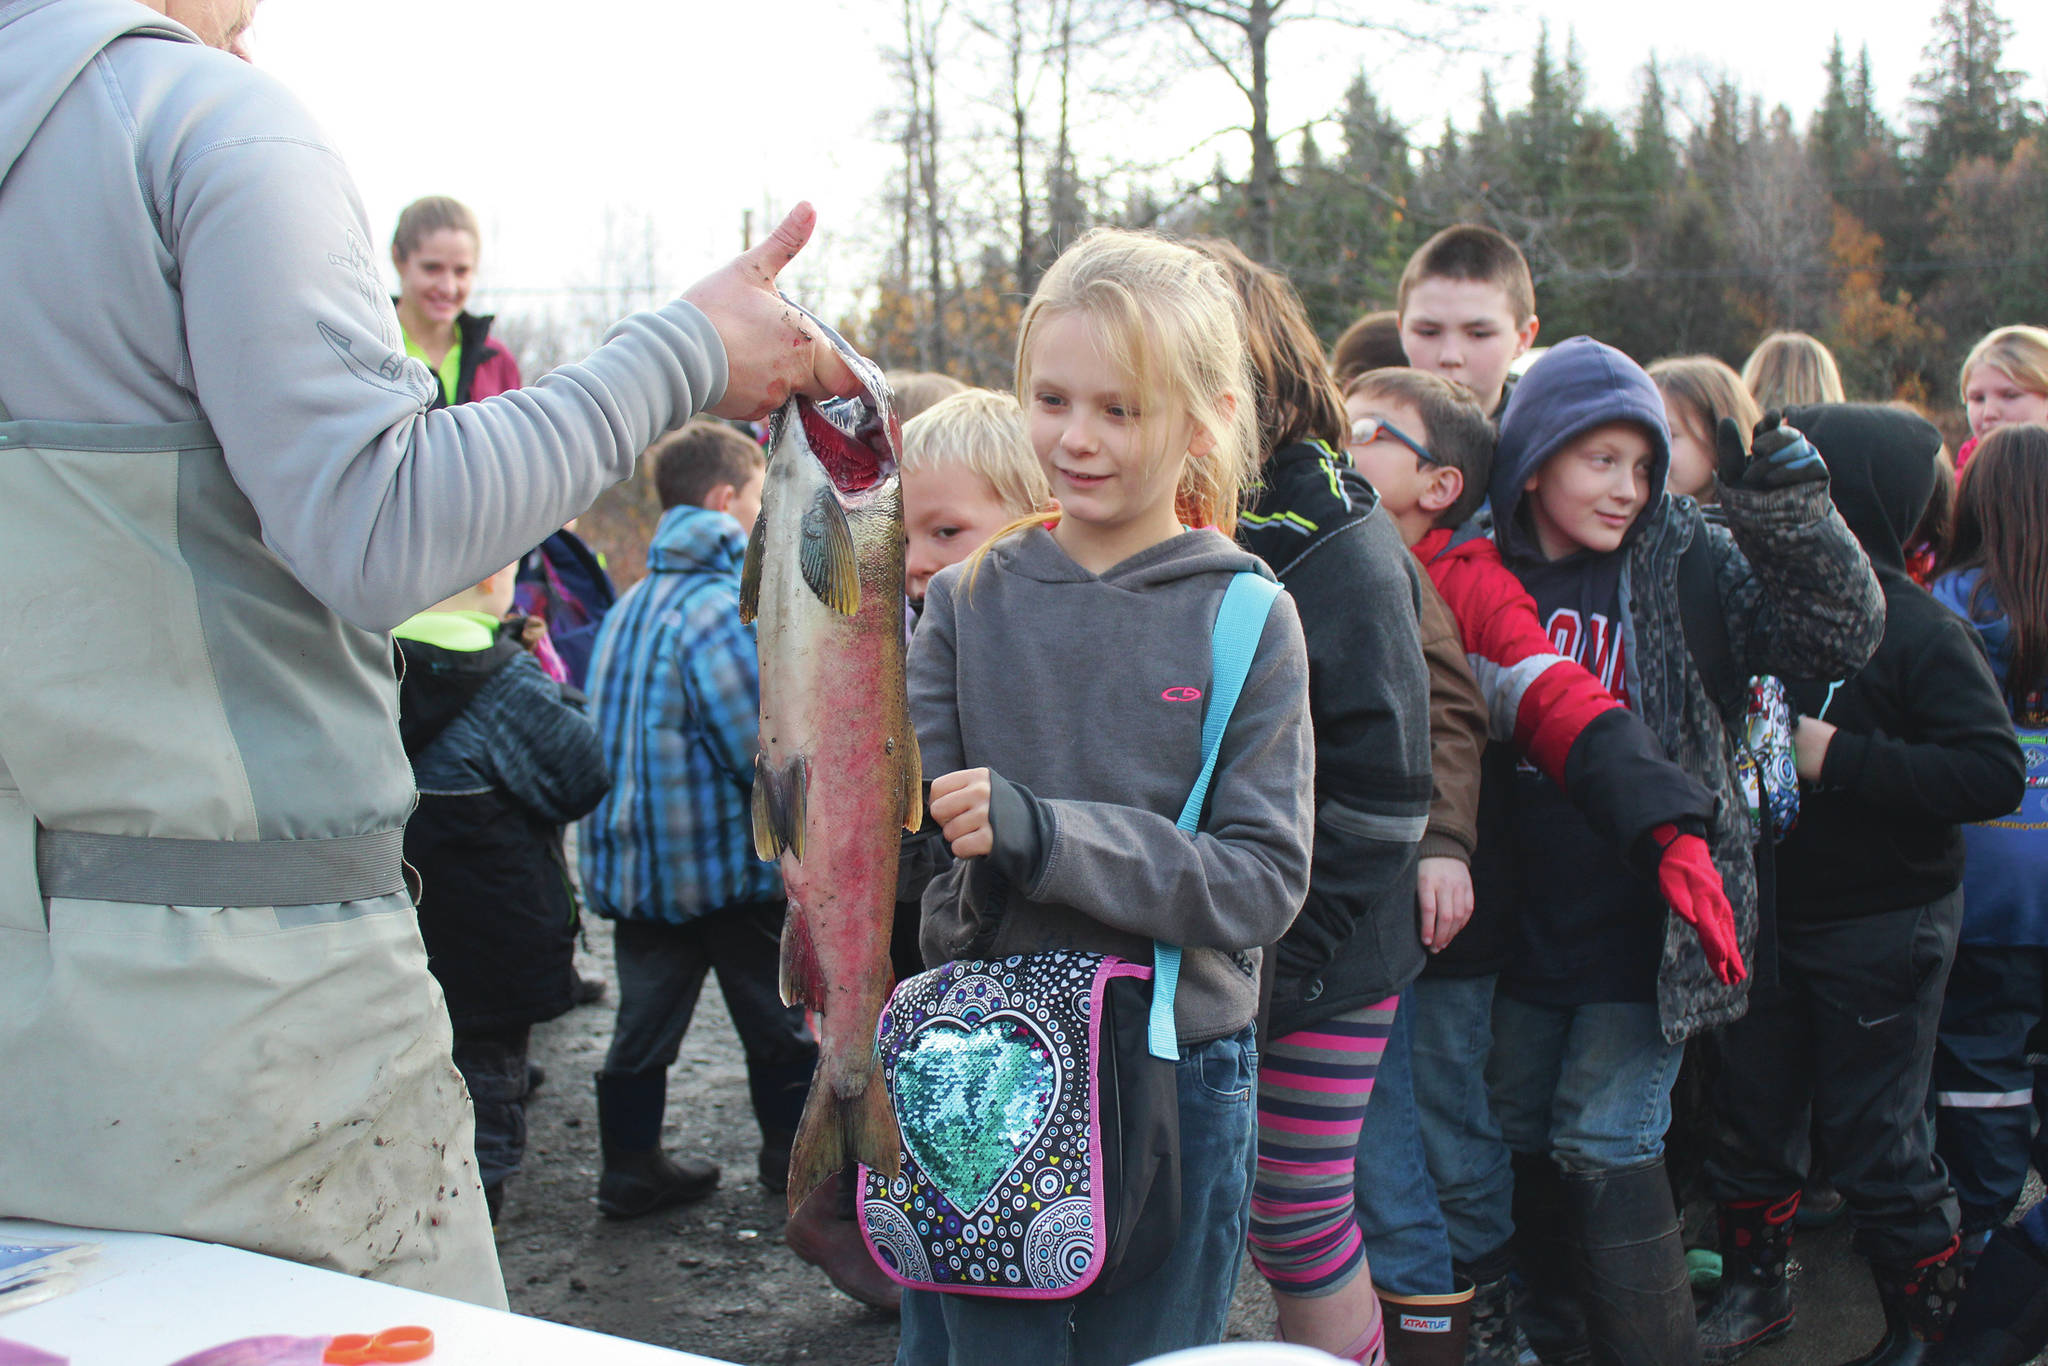 Students get fishy with annual egg take event